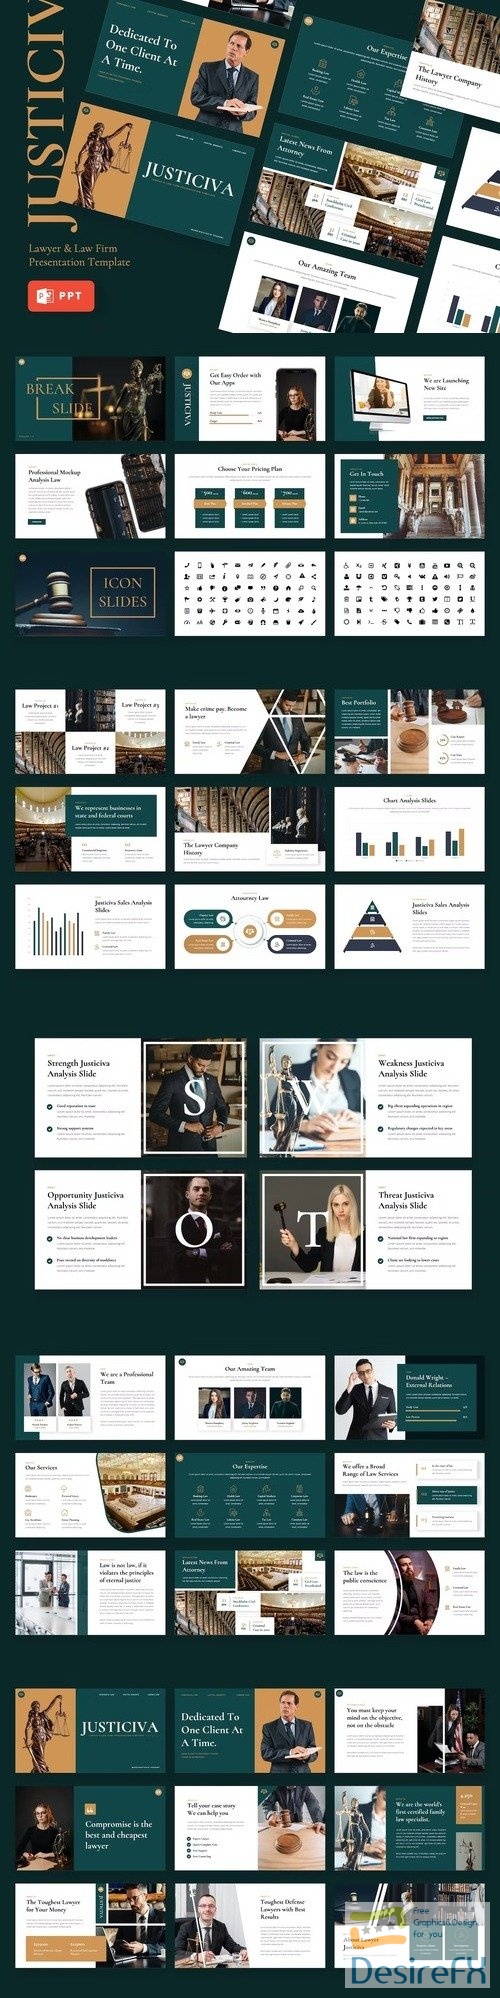 Justiciva - Lawyer & Law Firm Powerpoint, Keynote Template